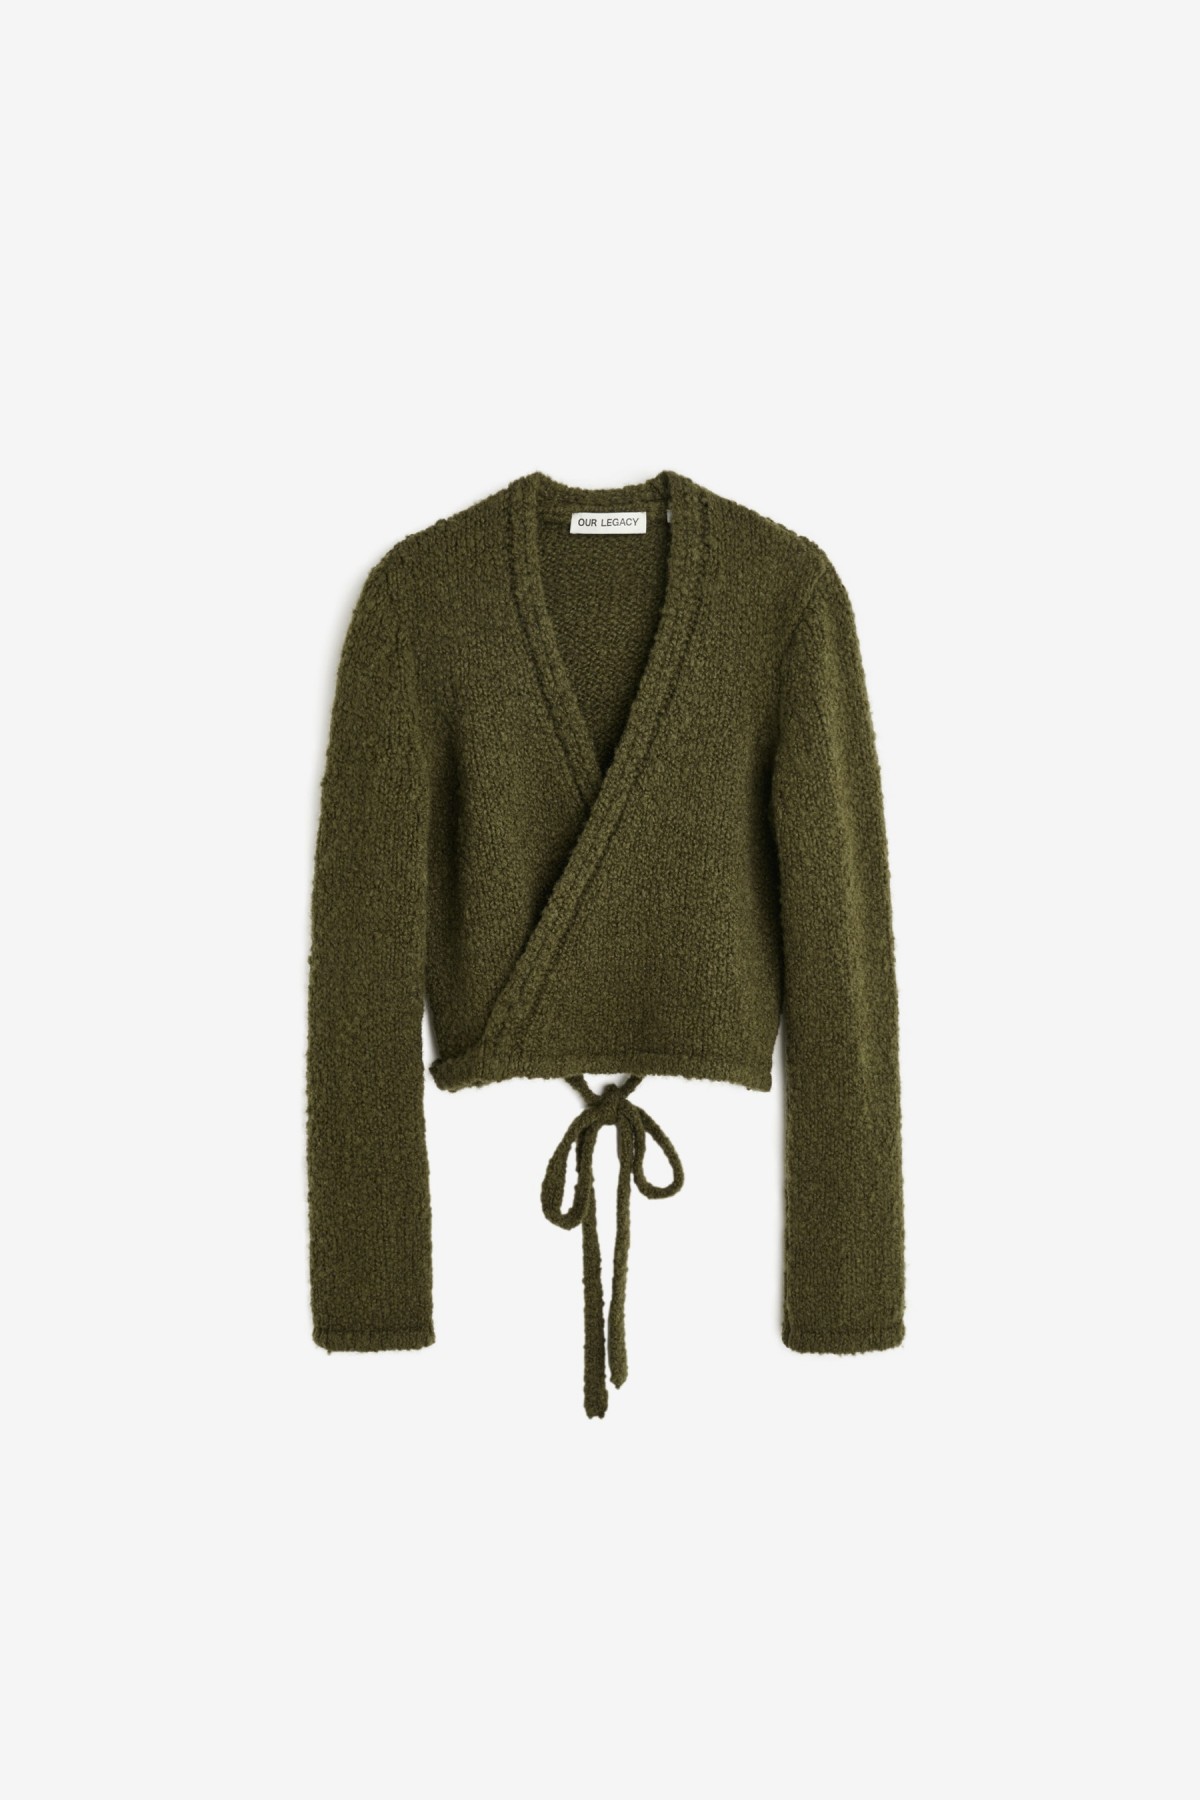 Our Legacy Wrap Knit in Olive Cartoon Wool